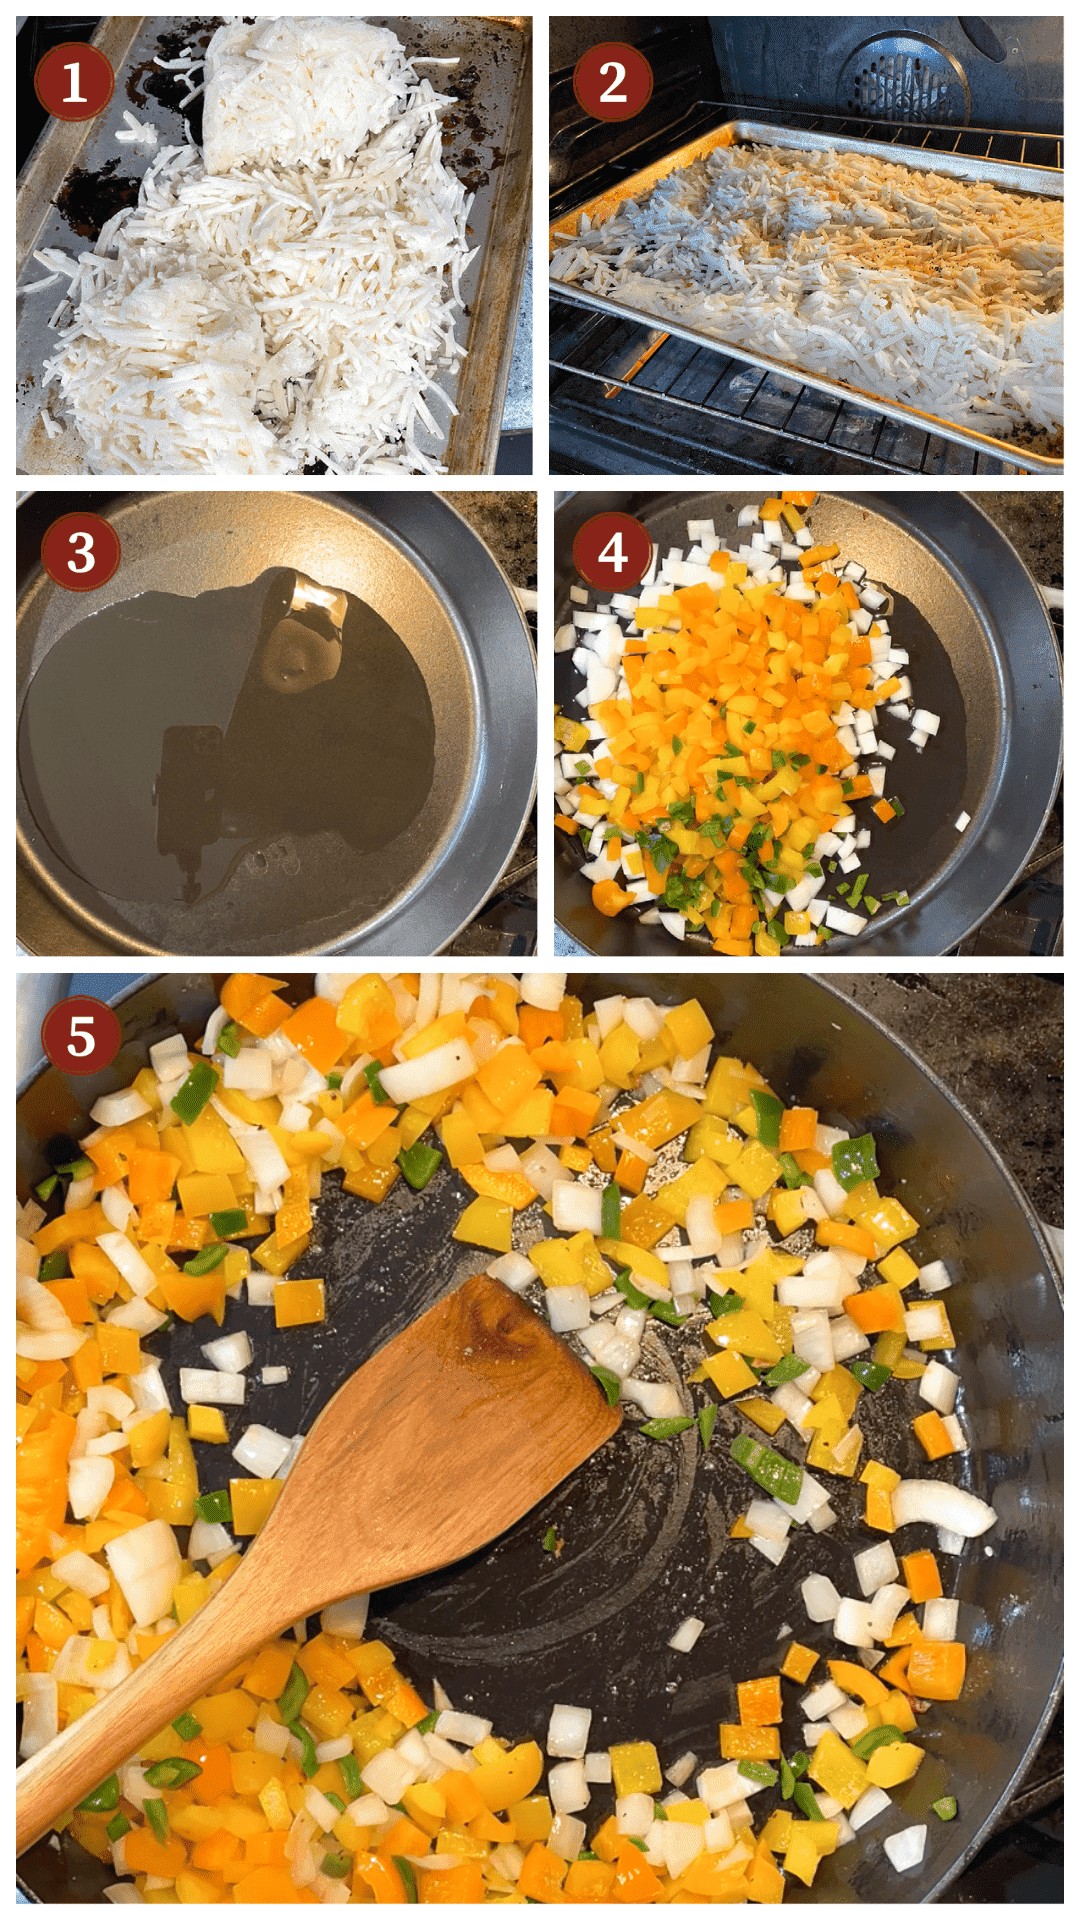 A collage of images showing the process of making hash brown casserole, steps 1 - 5.